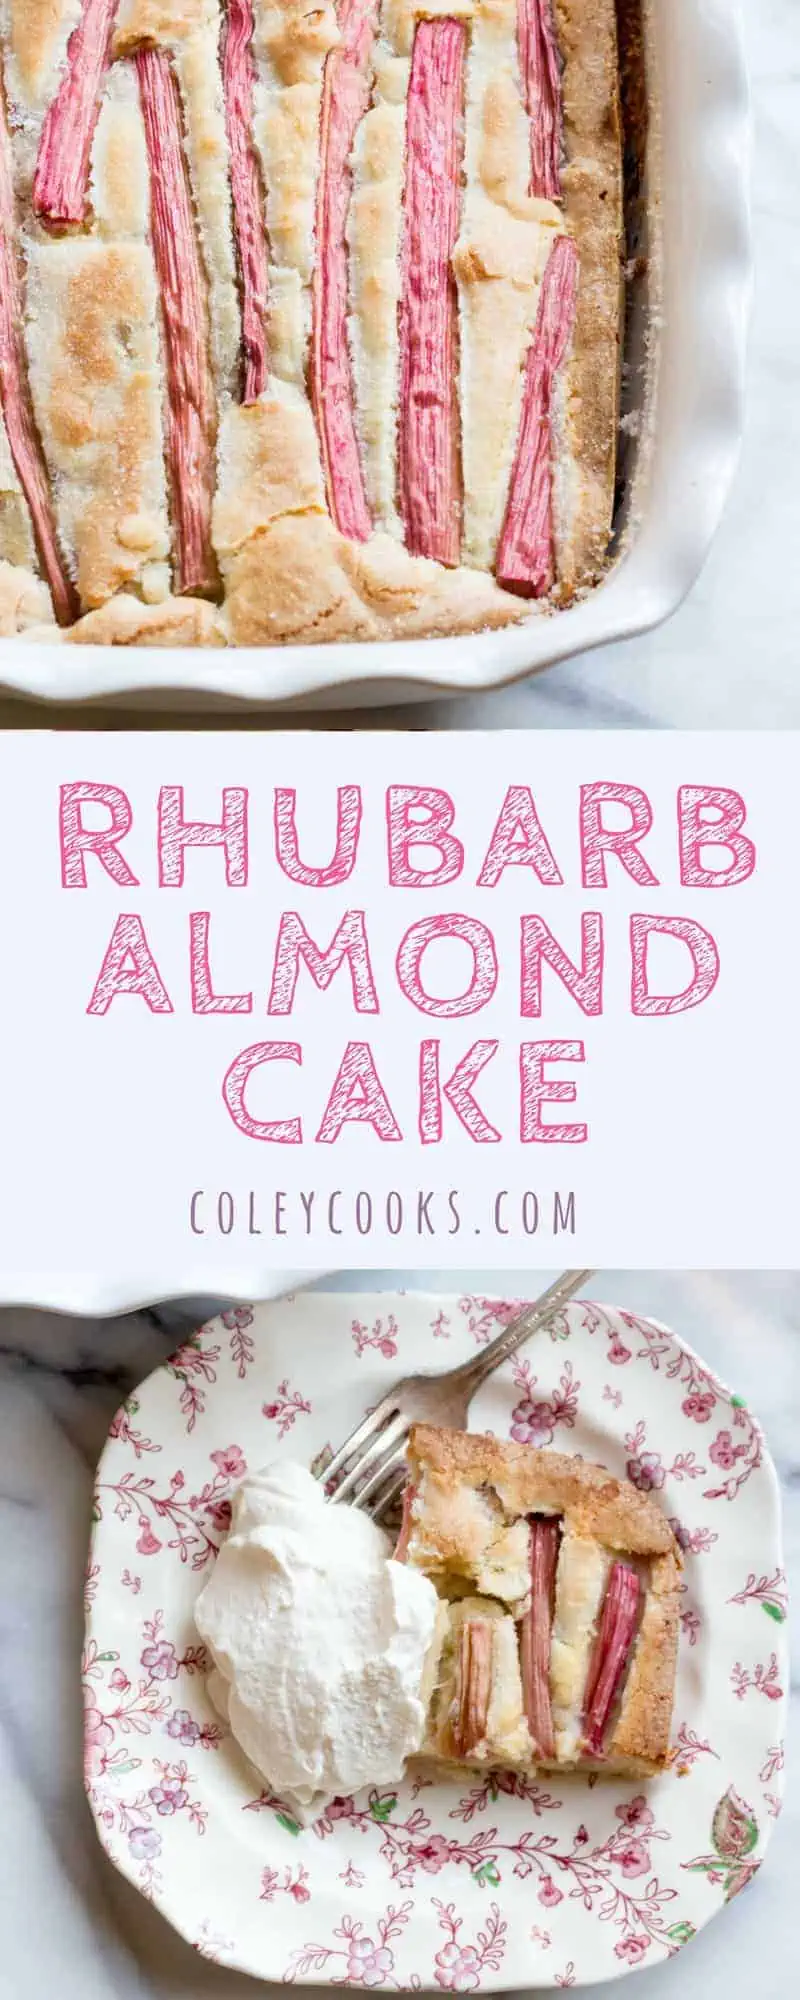 RHUBARB ALMOND CAKE with BOURBON WHIPPED CREAM|Tangy, dense, and delicious cake flecked with long strips of vibrant rhubarb and finished with boozy bourbon whipped cream. So great for Spring! | ColeyCooks.com